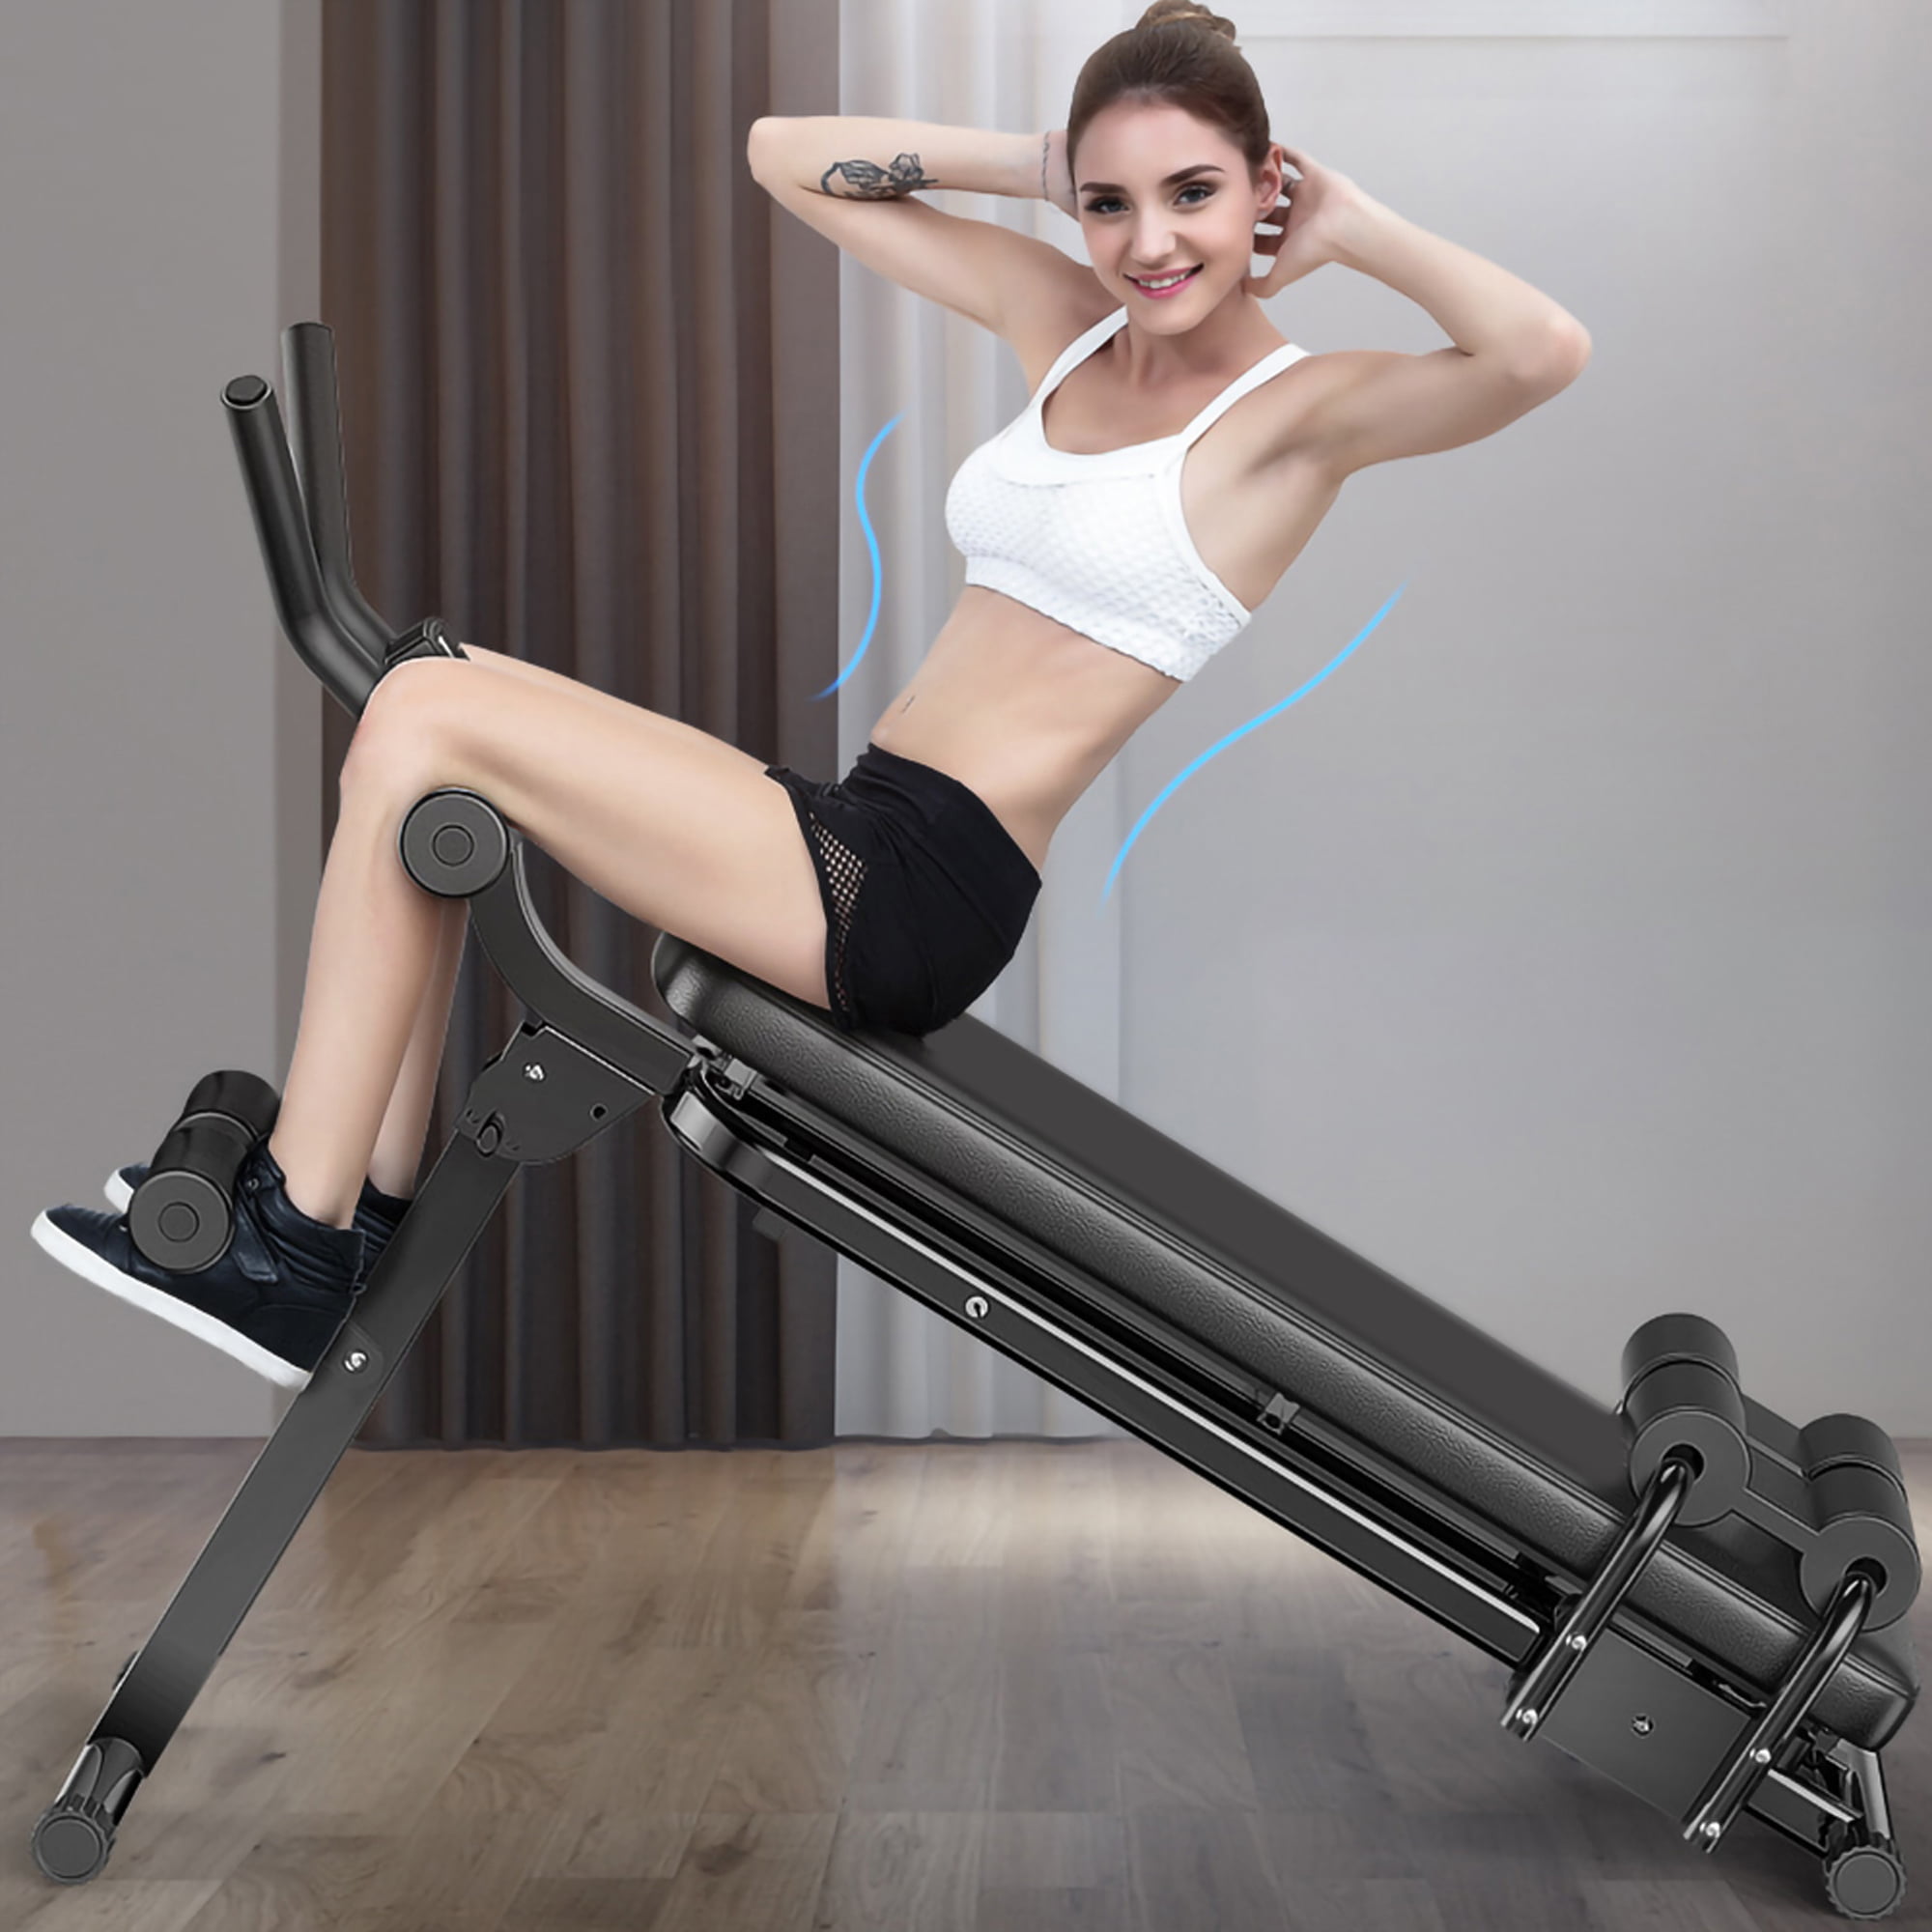 Details about   2 in 1 Folding Ab Sit Up Bench Hydraulic Rowing Machine Home Gym Fitness Board 